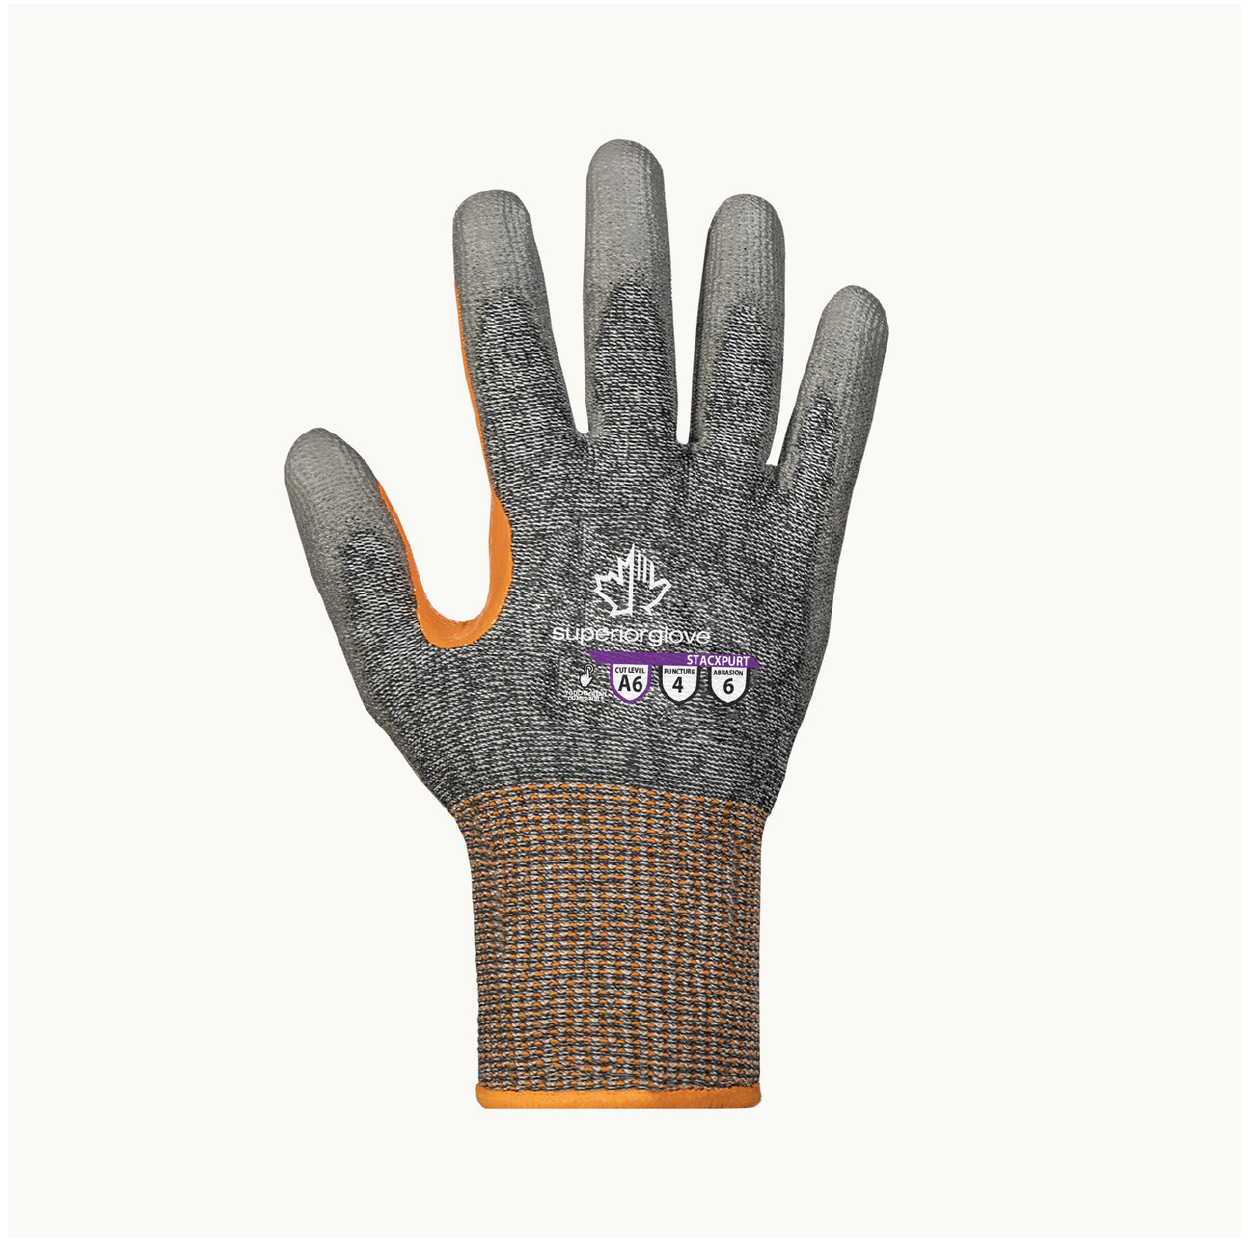 Cut-Resistant Hand Protection